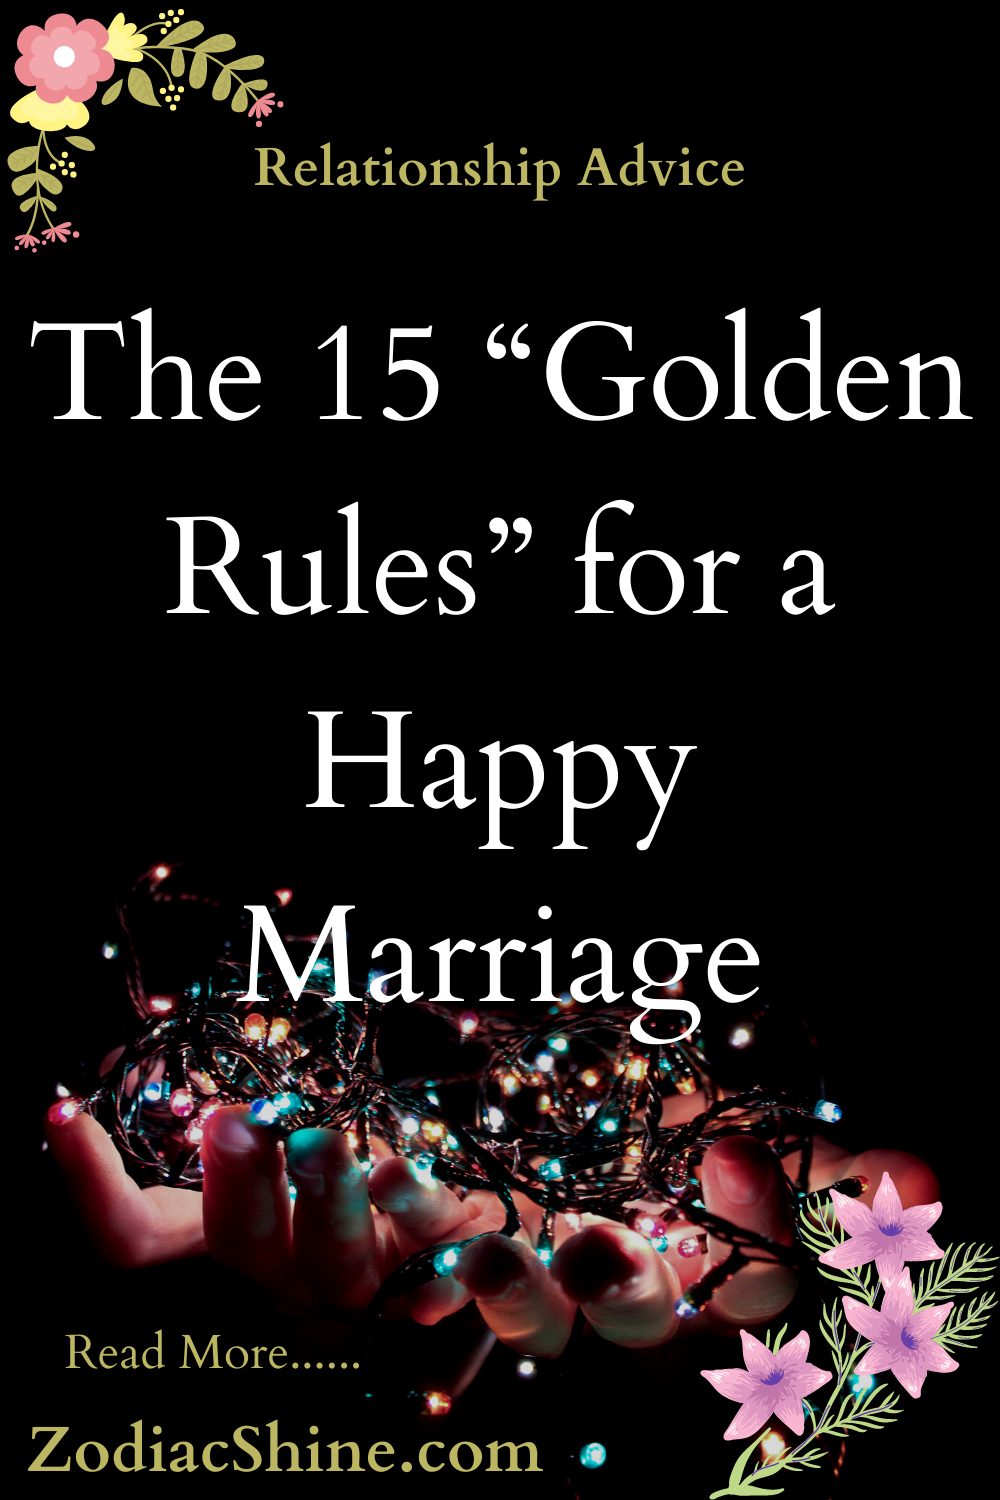 The 15 “Golden Rules” for a Happy Marriage